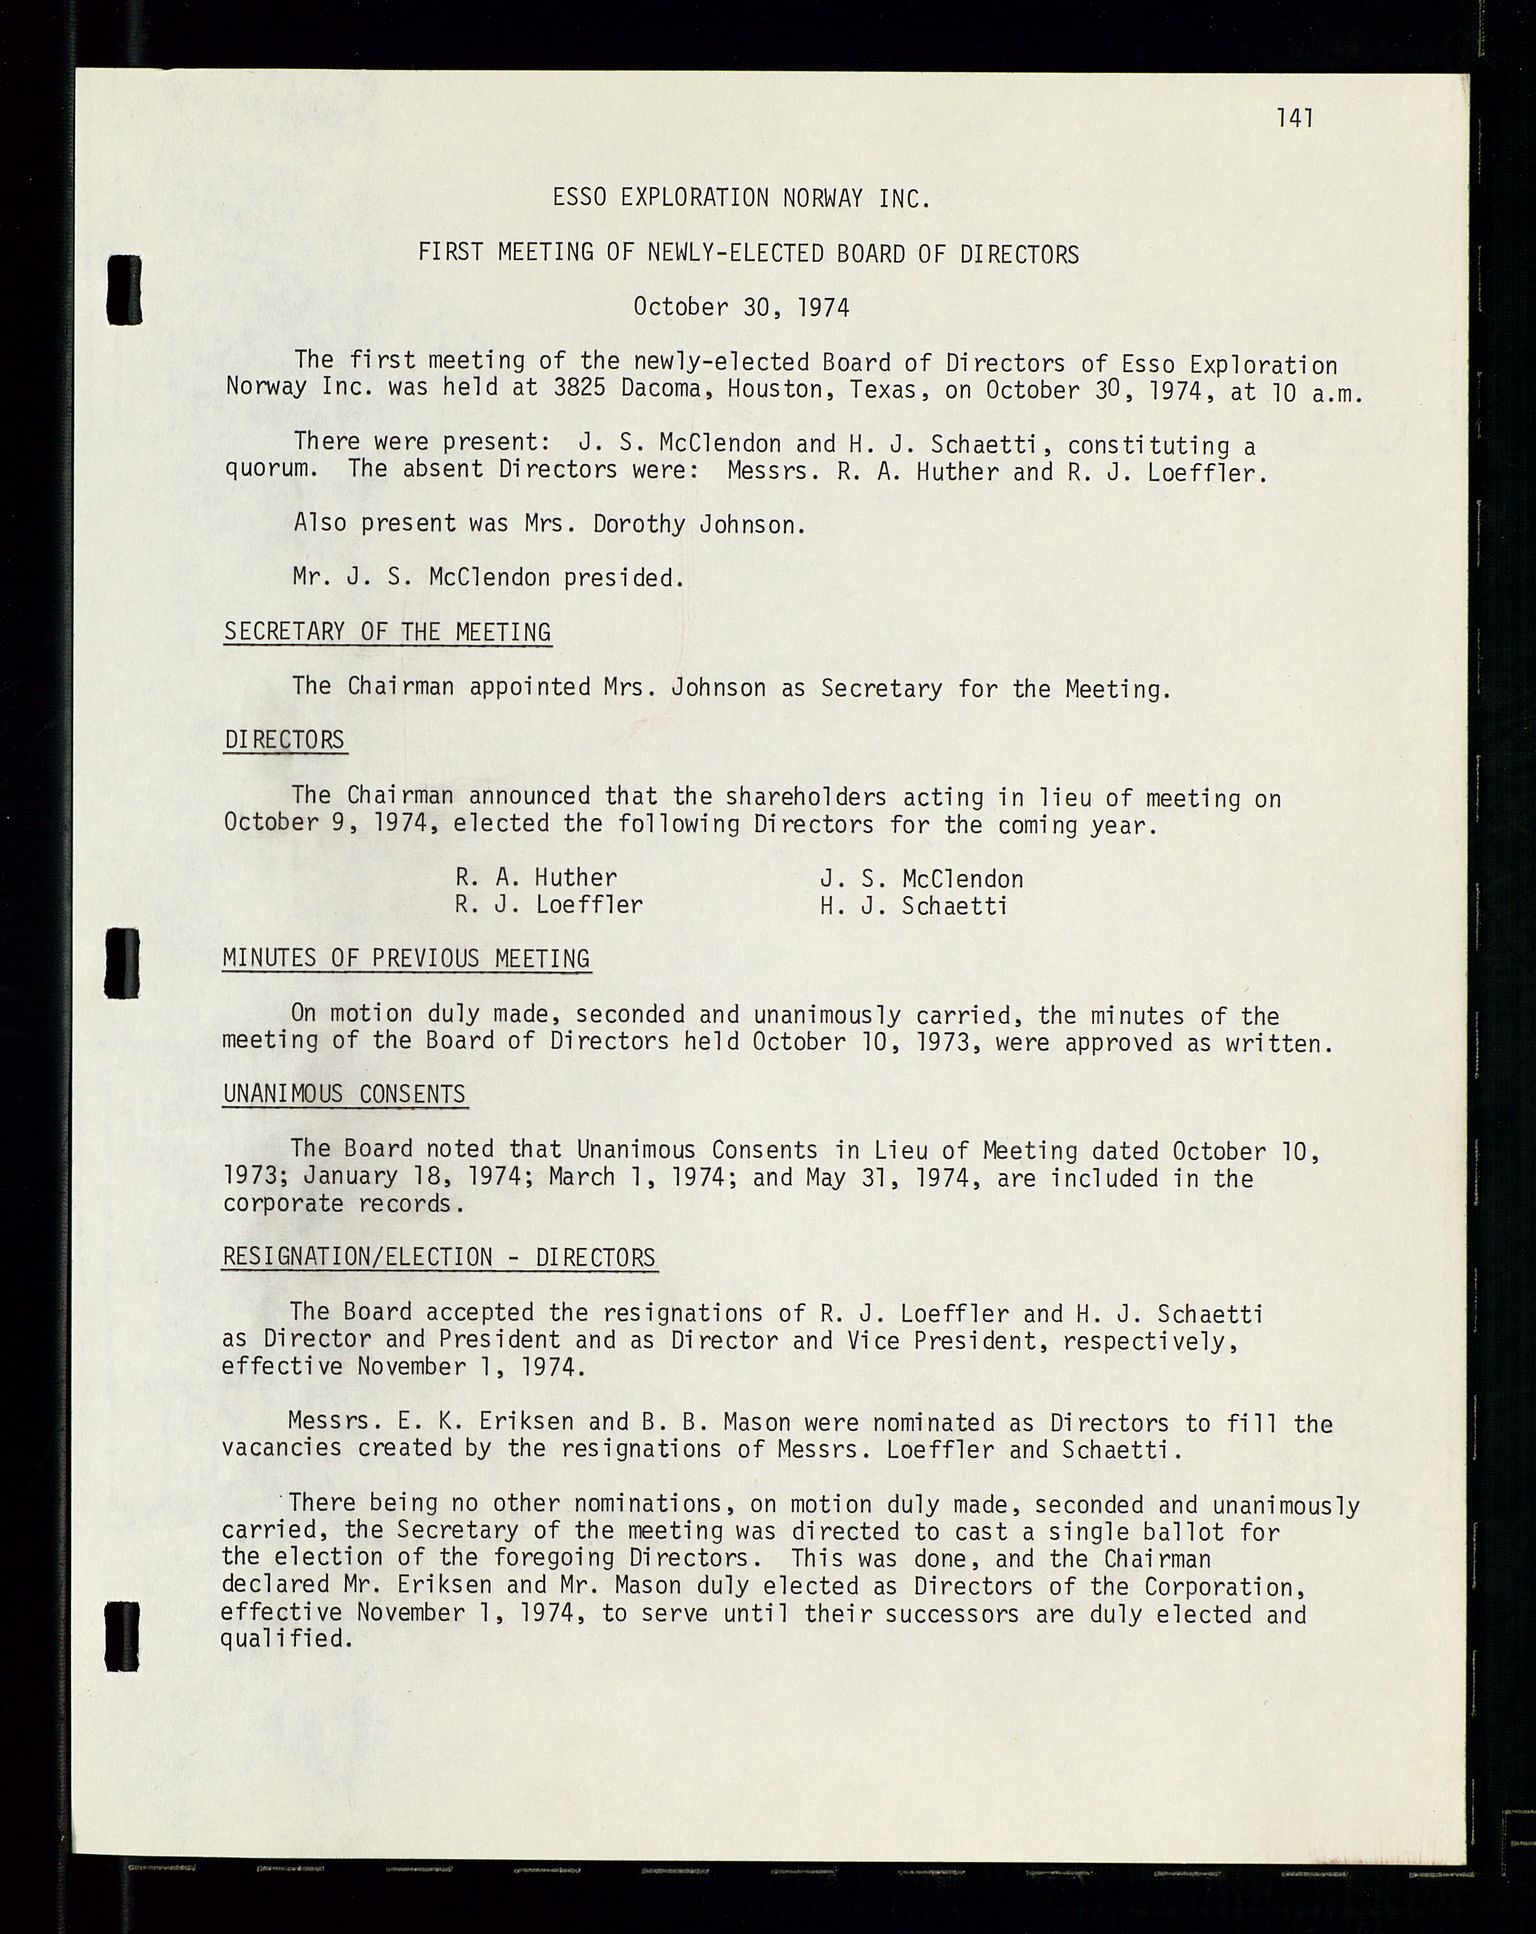 Pa 1512 - Esso Exploration and Production Norway Inc., SAST/A-101917/A/Aa/L0001/0001: Styredokumenter / Corporate records, By-Laws, Board meeting minutes, Incorporations, 1965-1975, s. 141